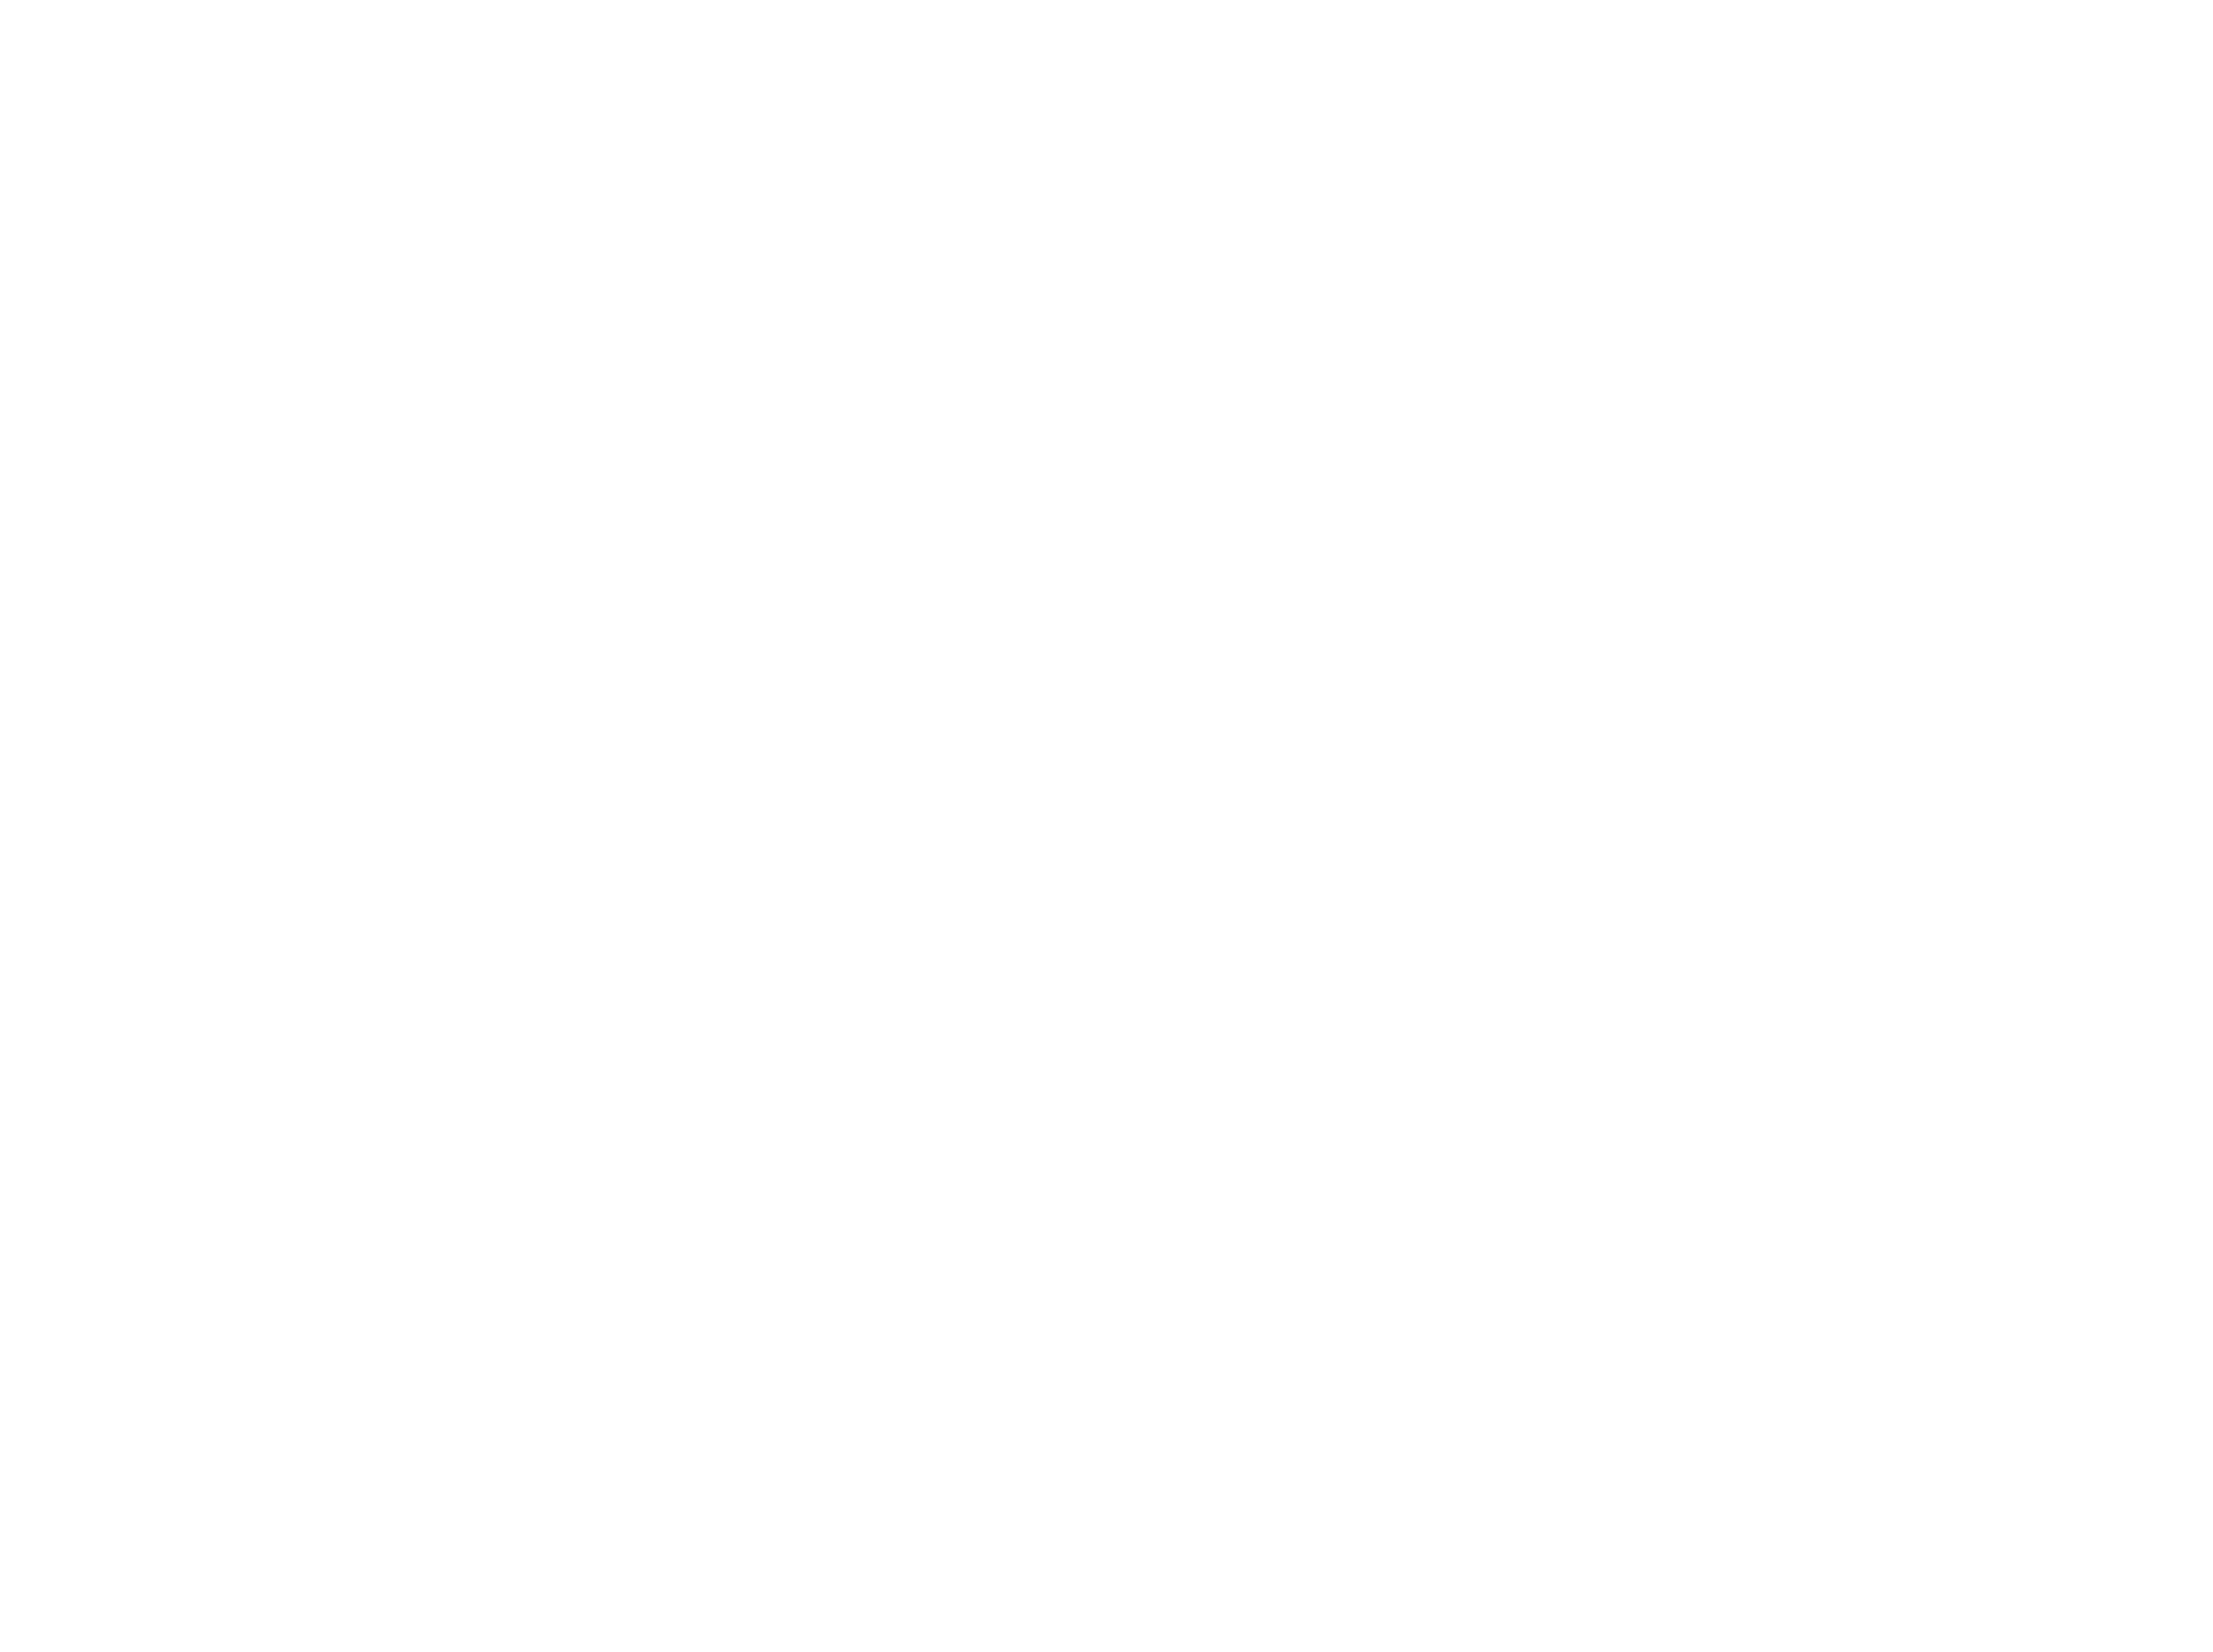 ACD Property Management